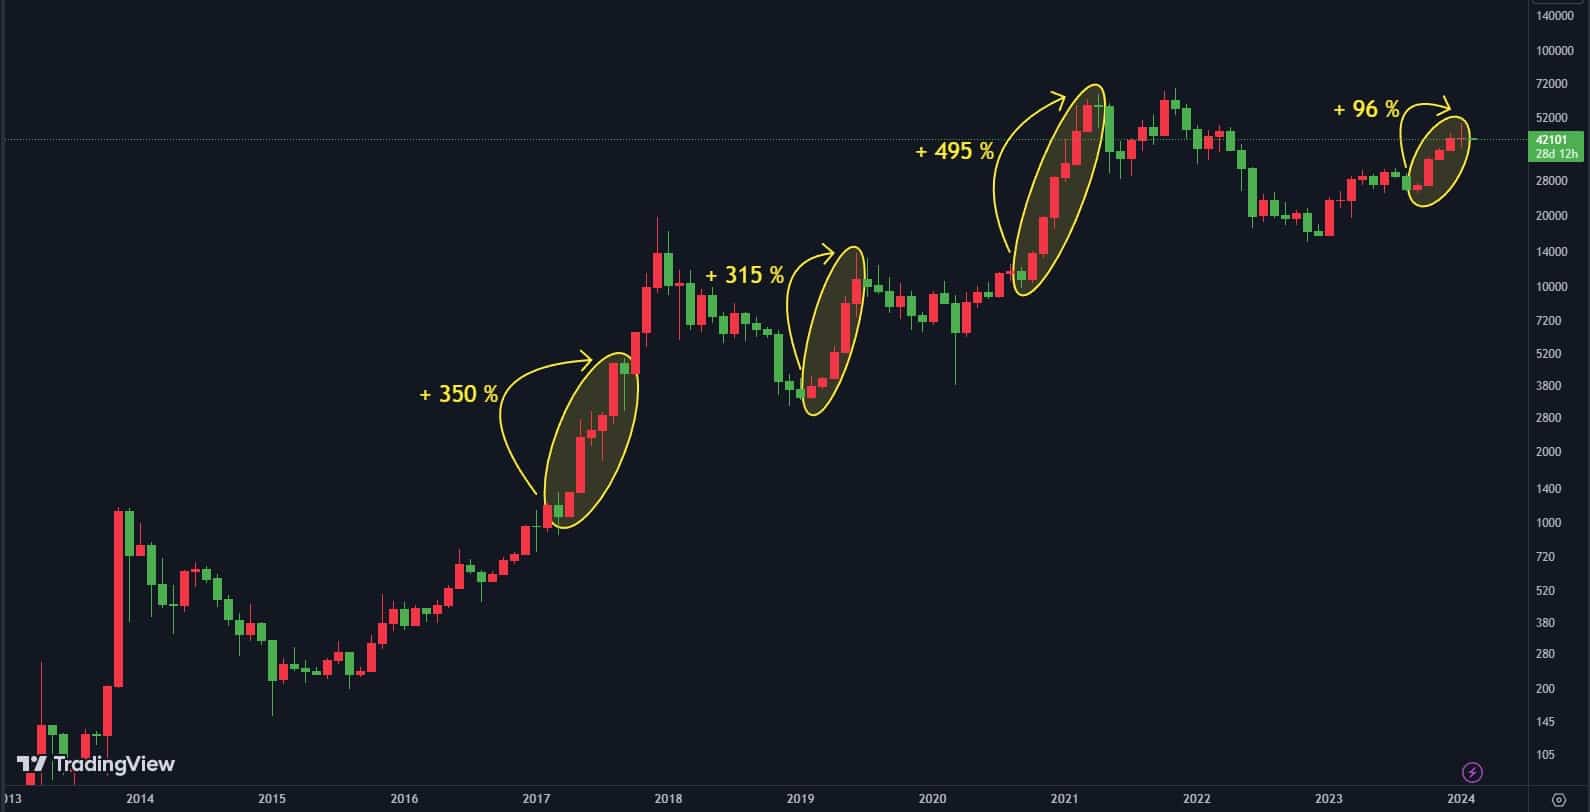 Bitcoin price showing periods of 5 consecutive months of increase